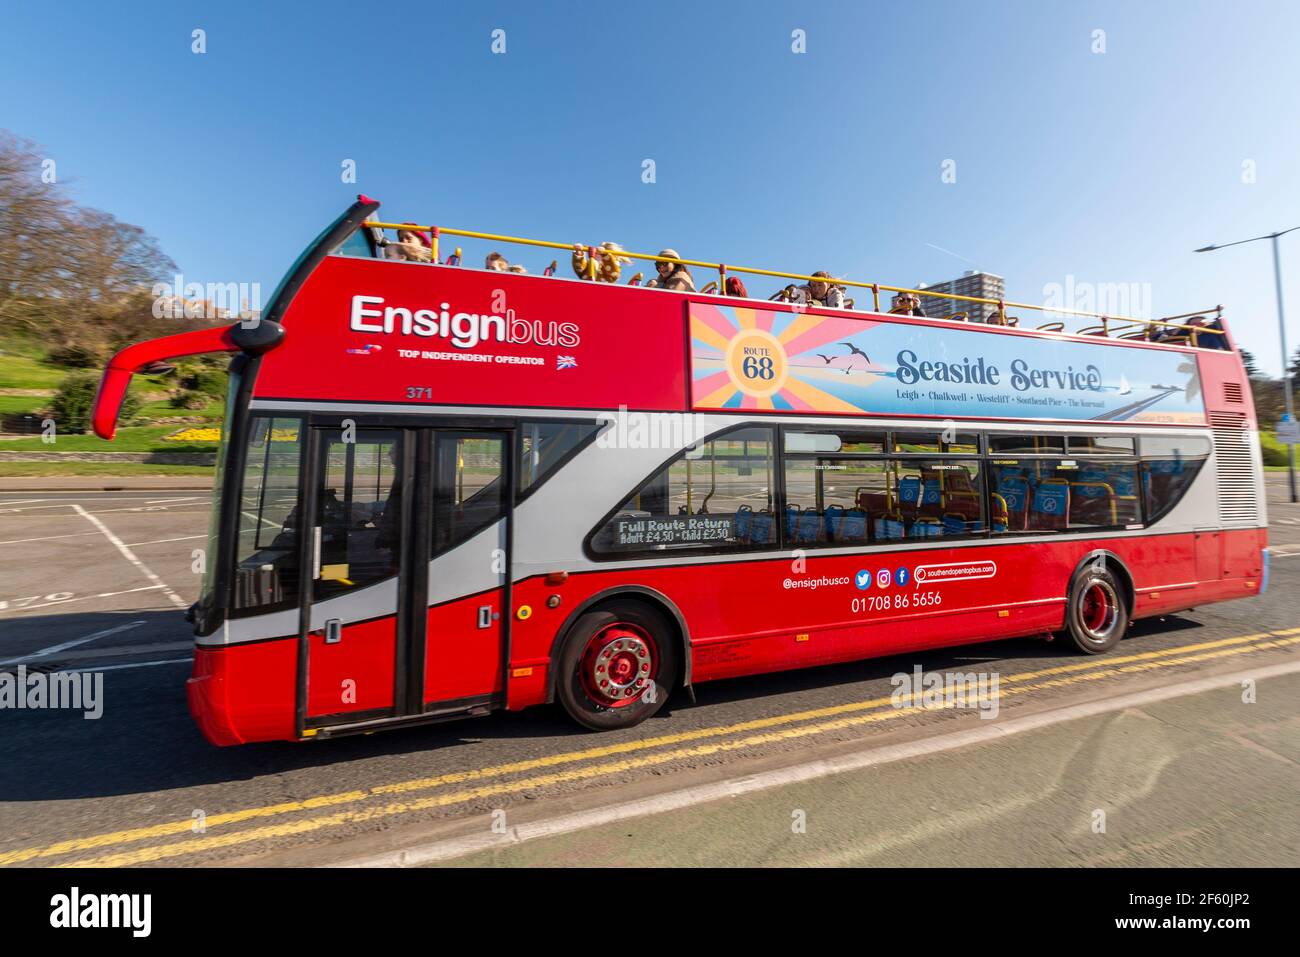 Southend on Sea, Essex, UK. 29th Mar, 2021. The first day of the UK’s easing of lockdown has cleared into a bright and sunny day, though remaining cool. Ensignbus have commenced their seafront 'Seaside Service' open top bus service Stock Photo